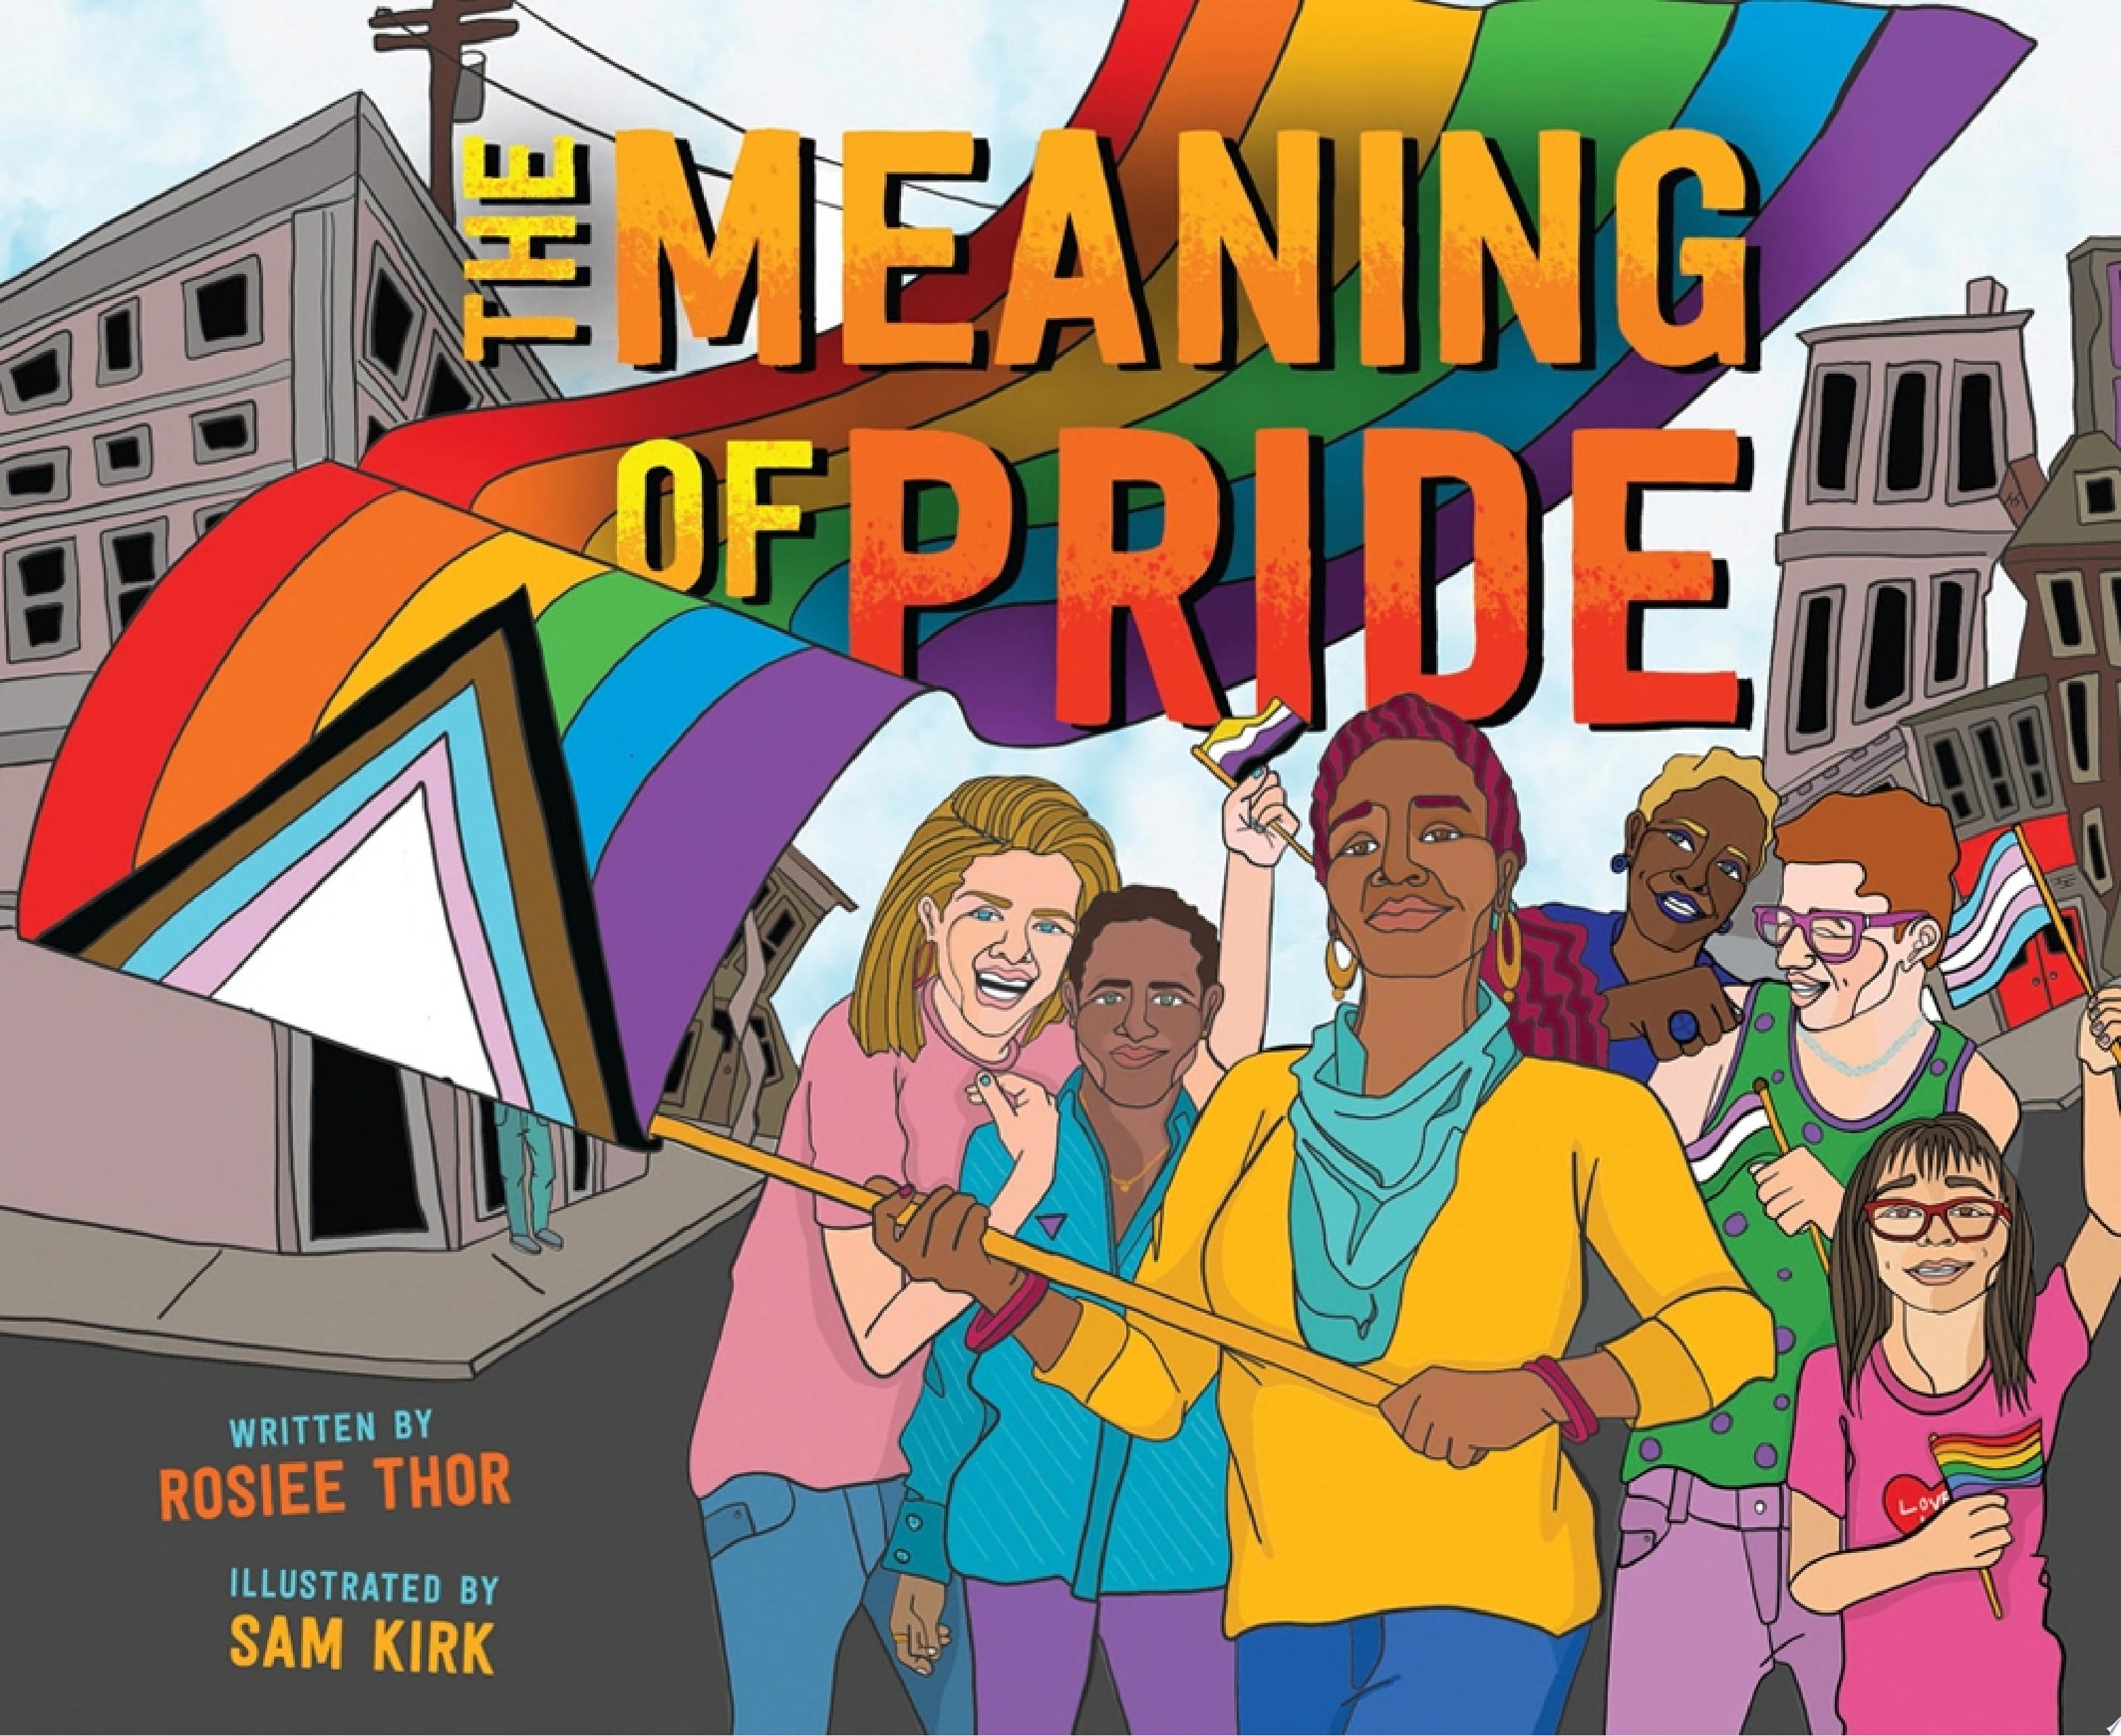 Image for "The Meaning of Pride"